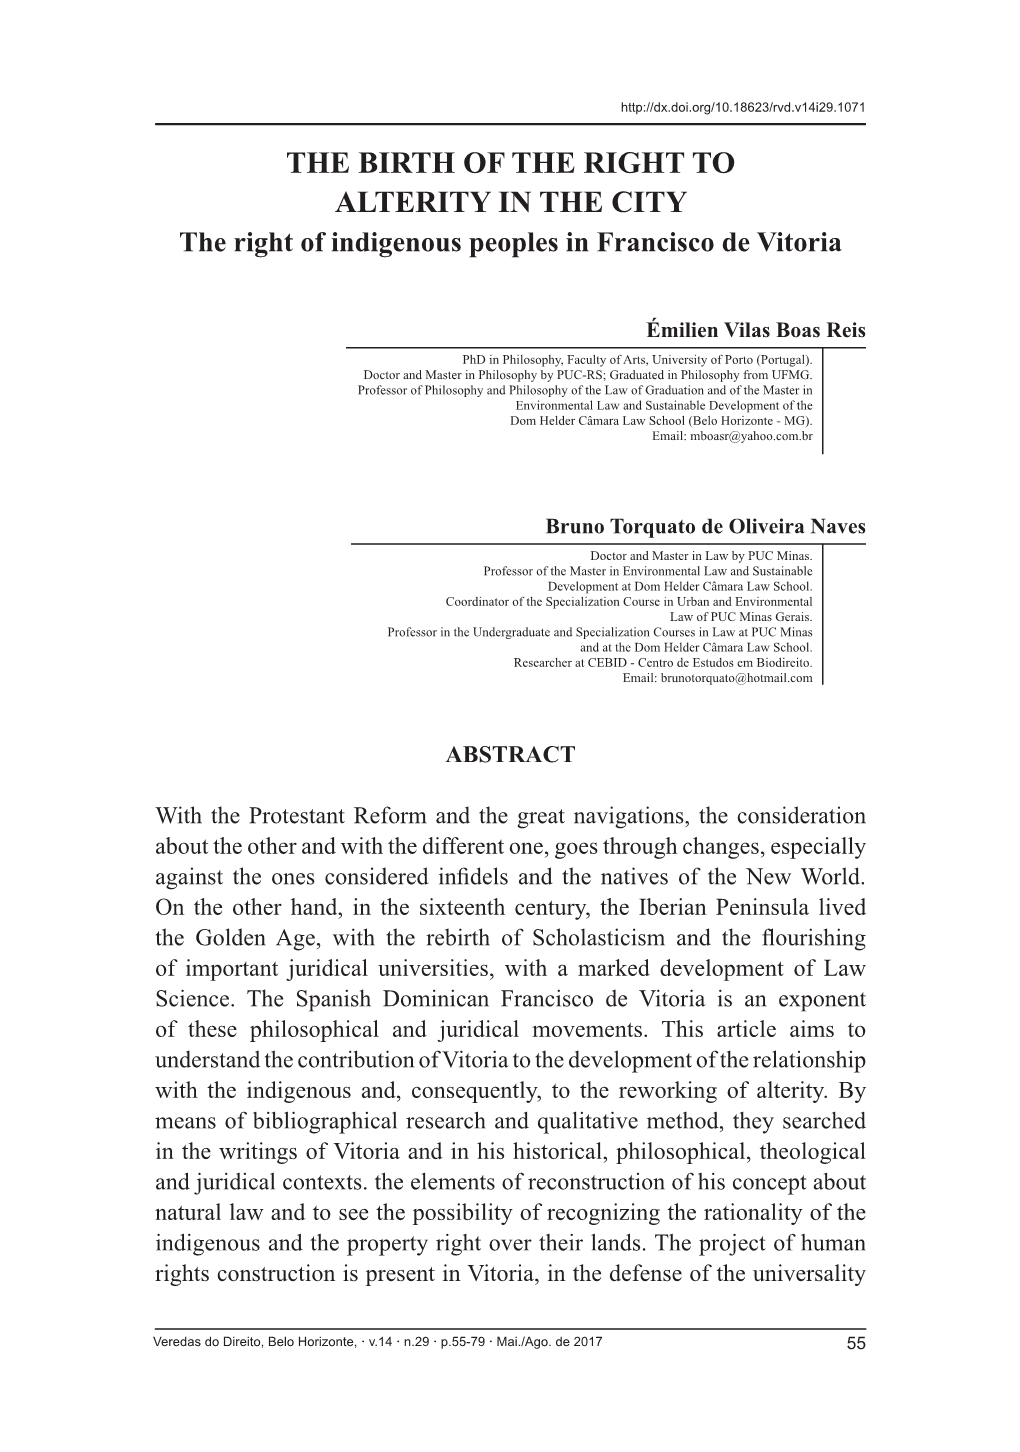 THE BIRTH of the RIGHT to ALTERITY in the CITY the Right of Indigenous Peoples in Francisco De Vitoria